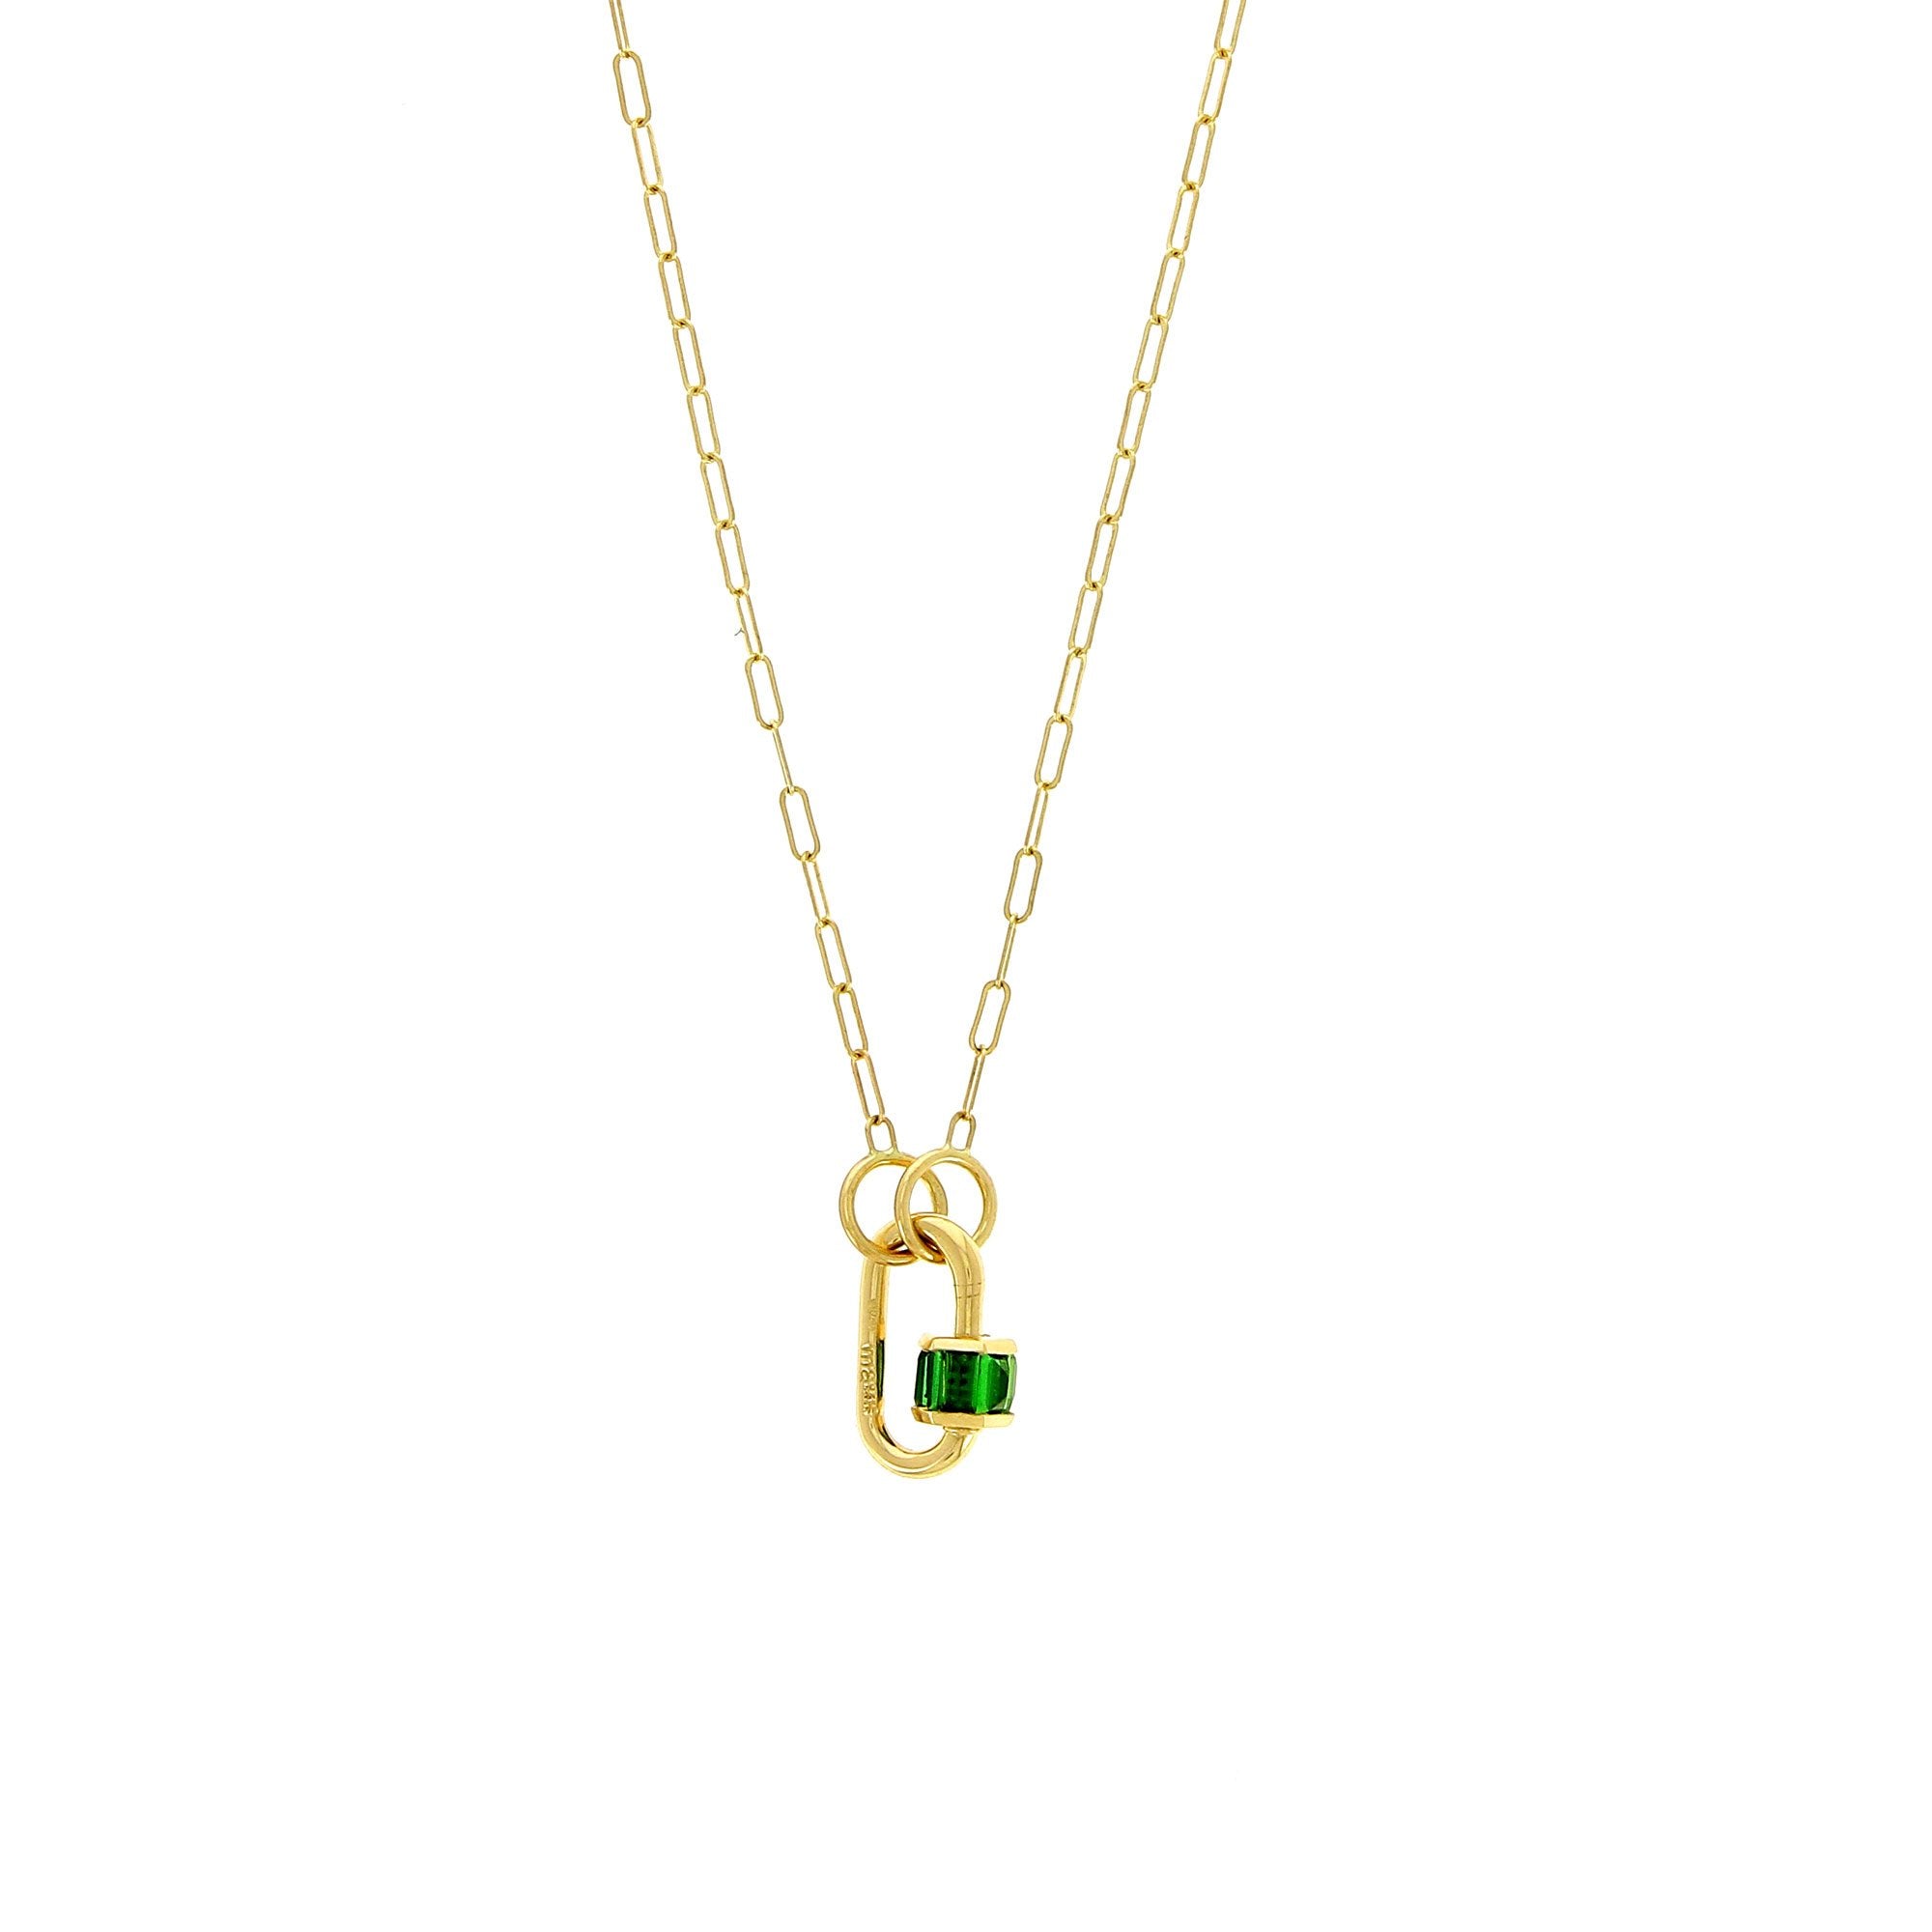 24 Yellow Gold Square Link Chain